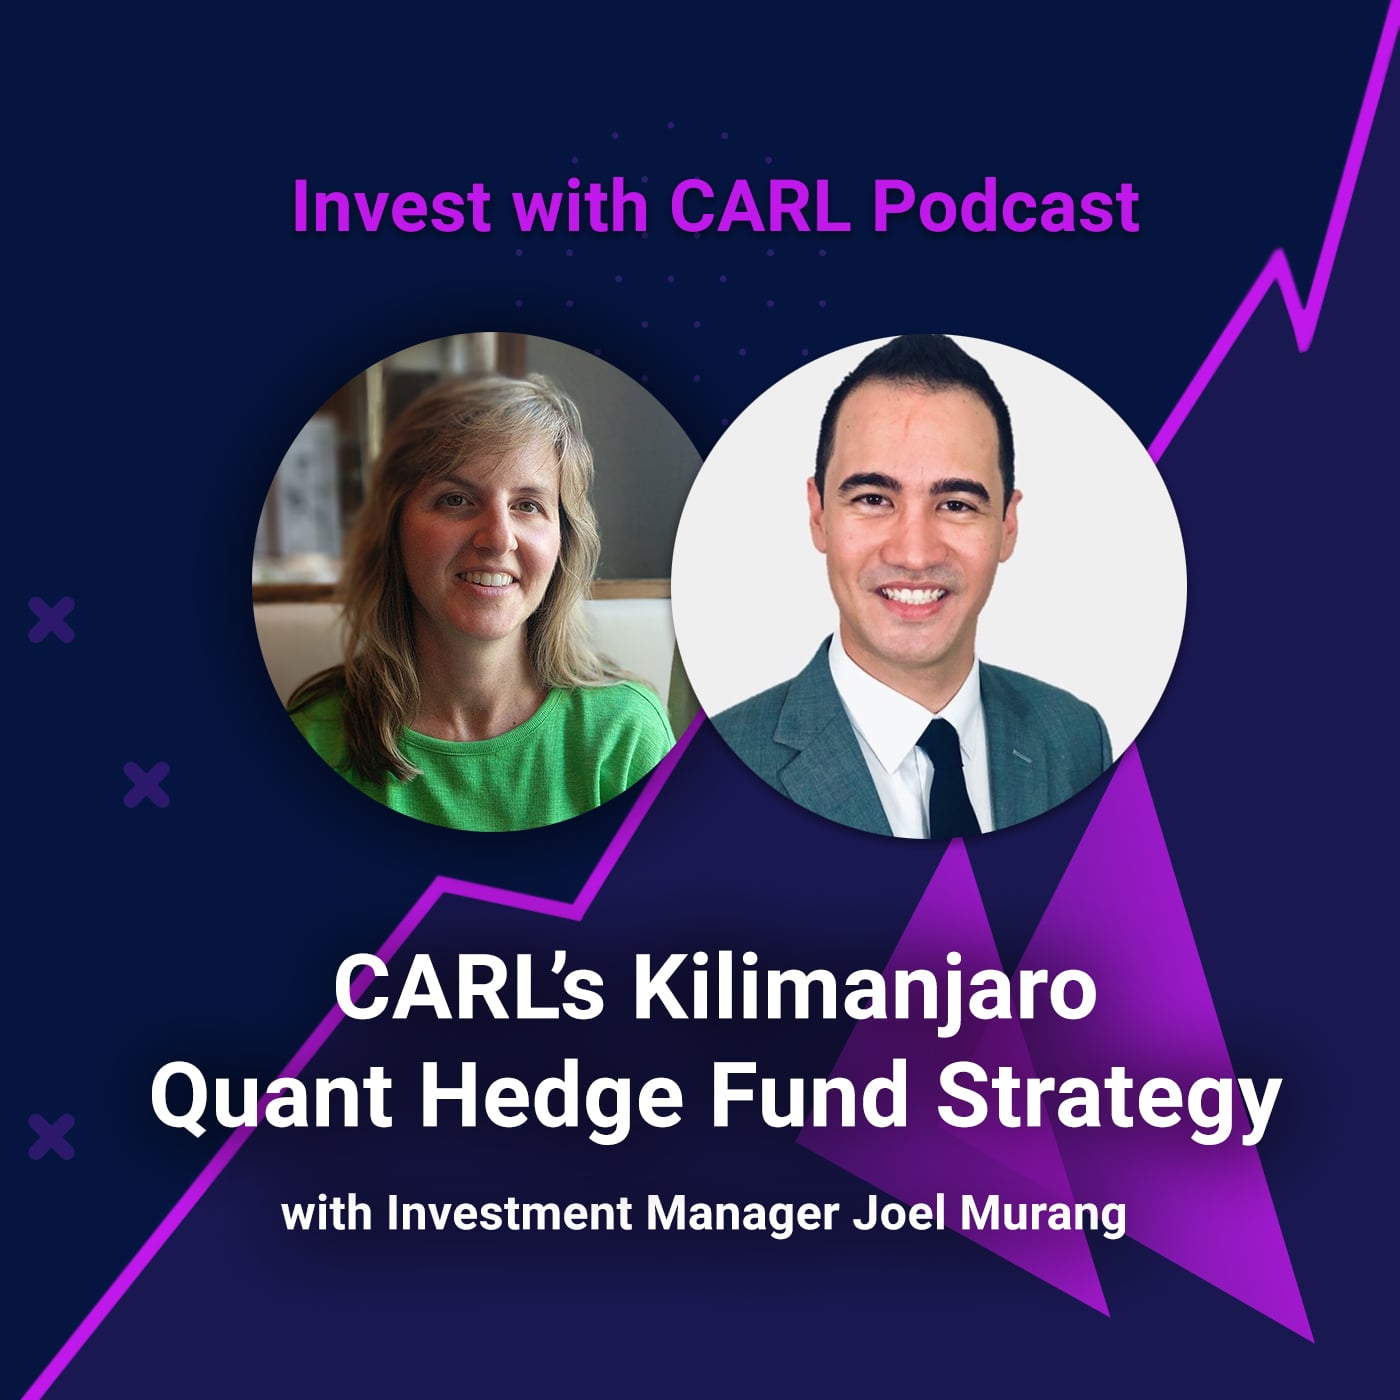 CARL’s Kilimanjaro Quant Hedge Fund Strategy with Investment Manager Joel Murang